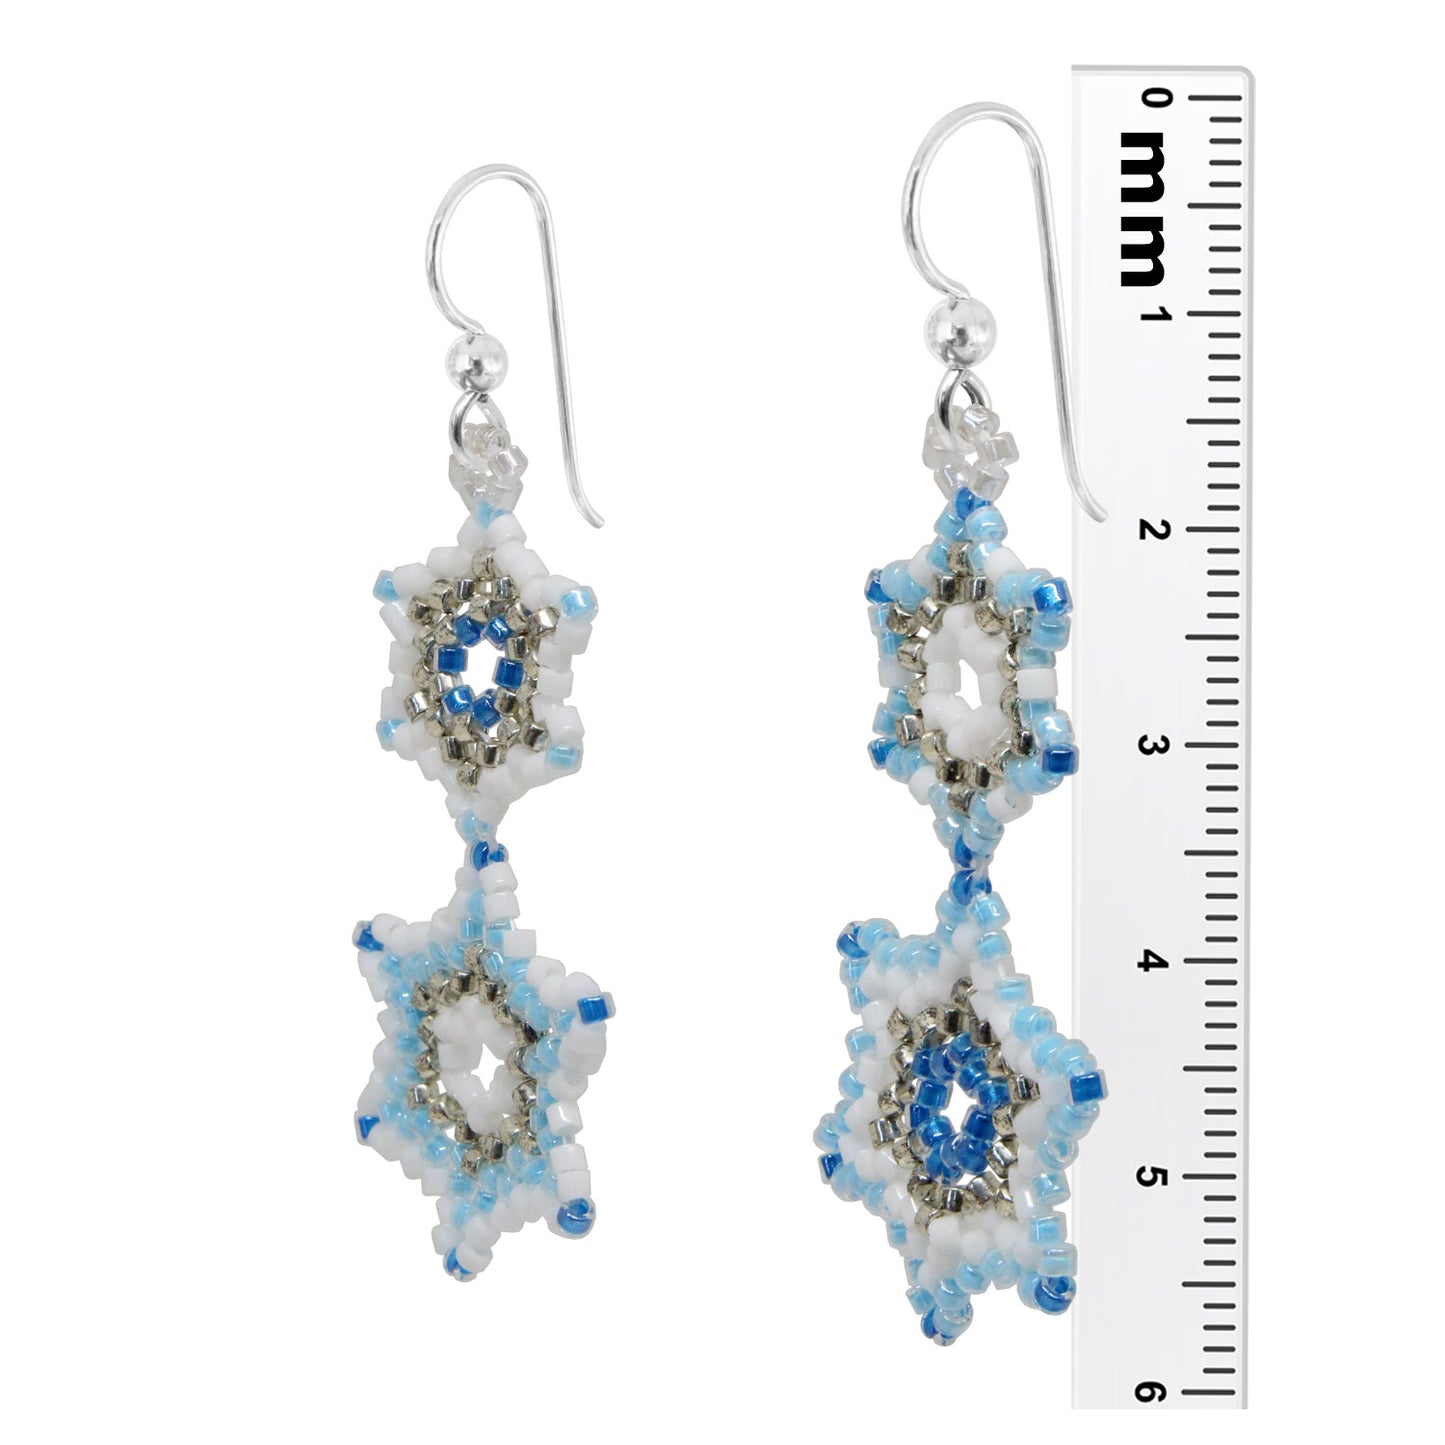 Winter Snowflake Earrings / 58mm length / sterling silver earwires with ball